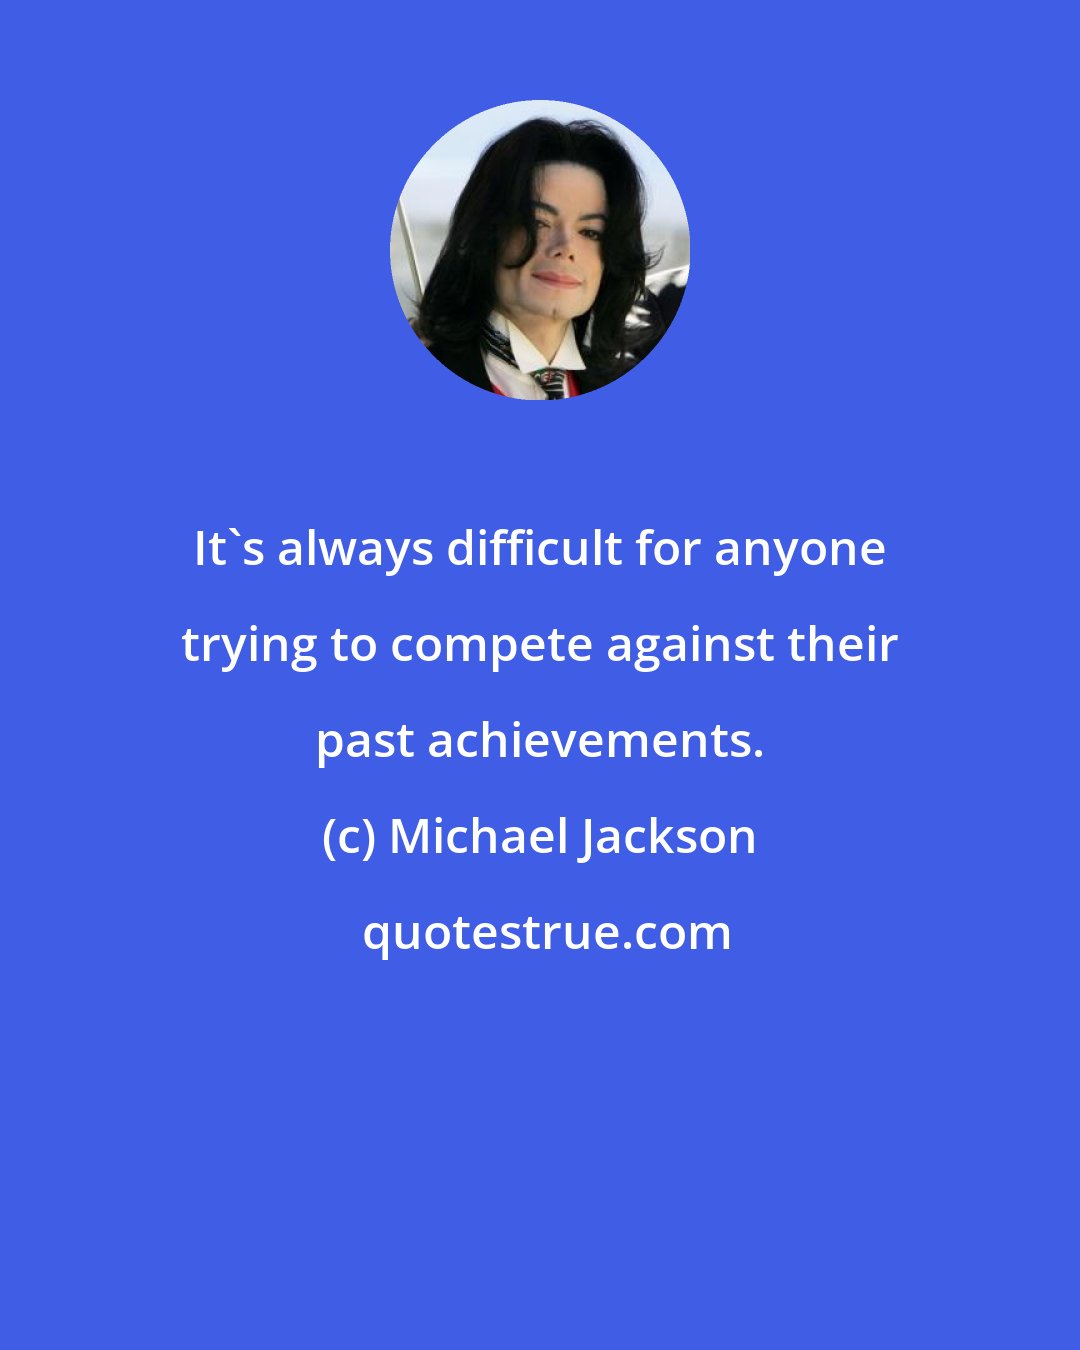 Michael Jackson: It's always difficult for anyone trying to compete against their past achievements.